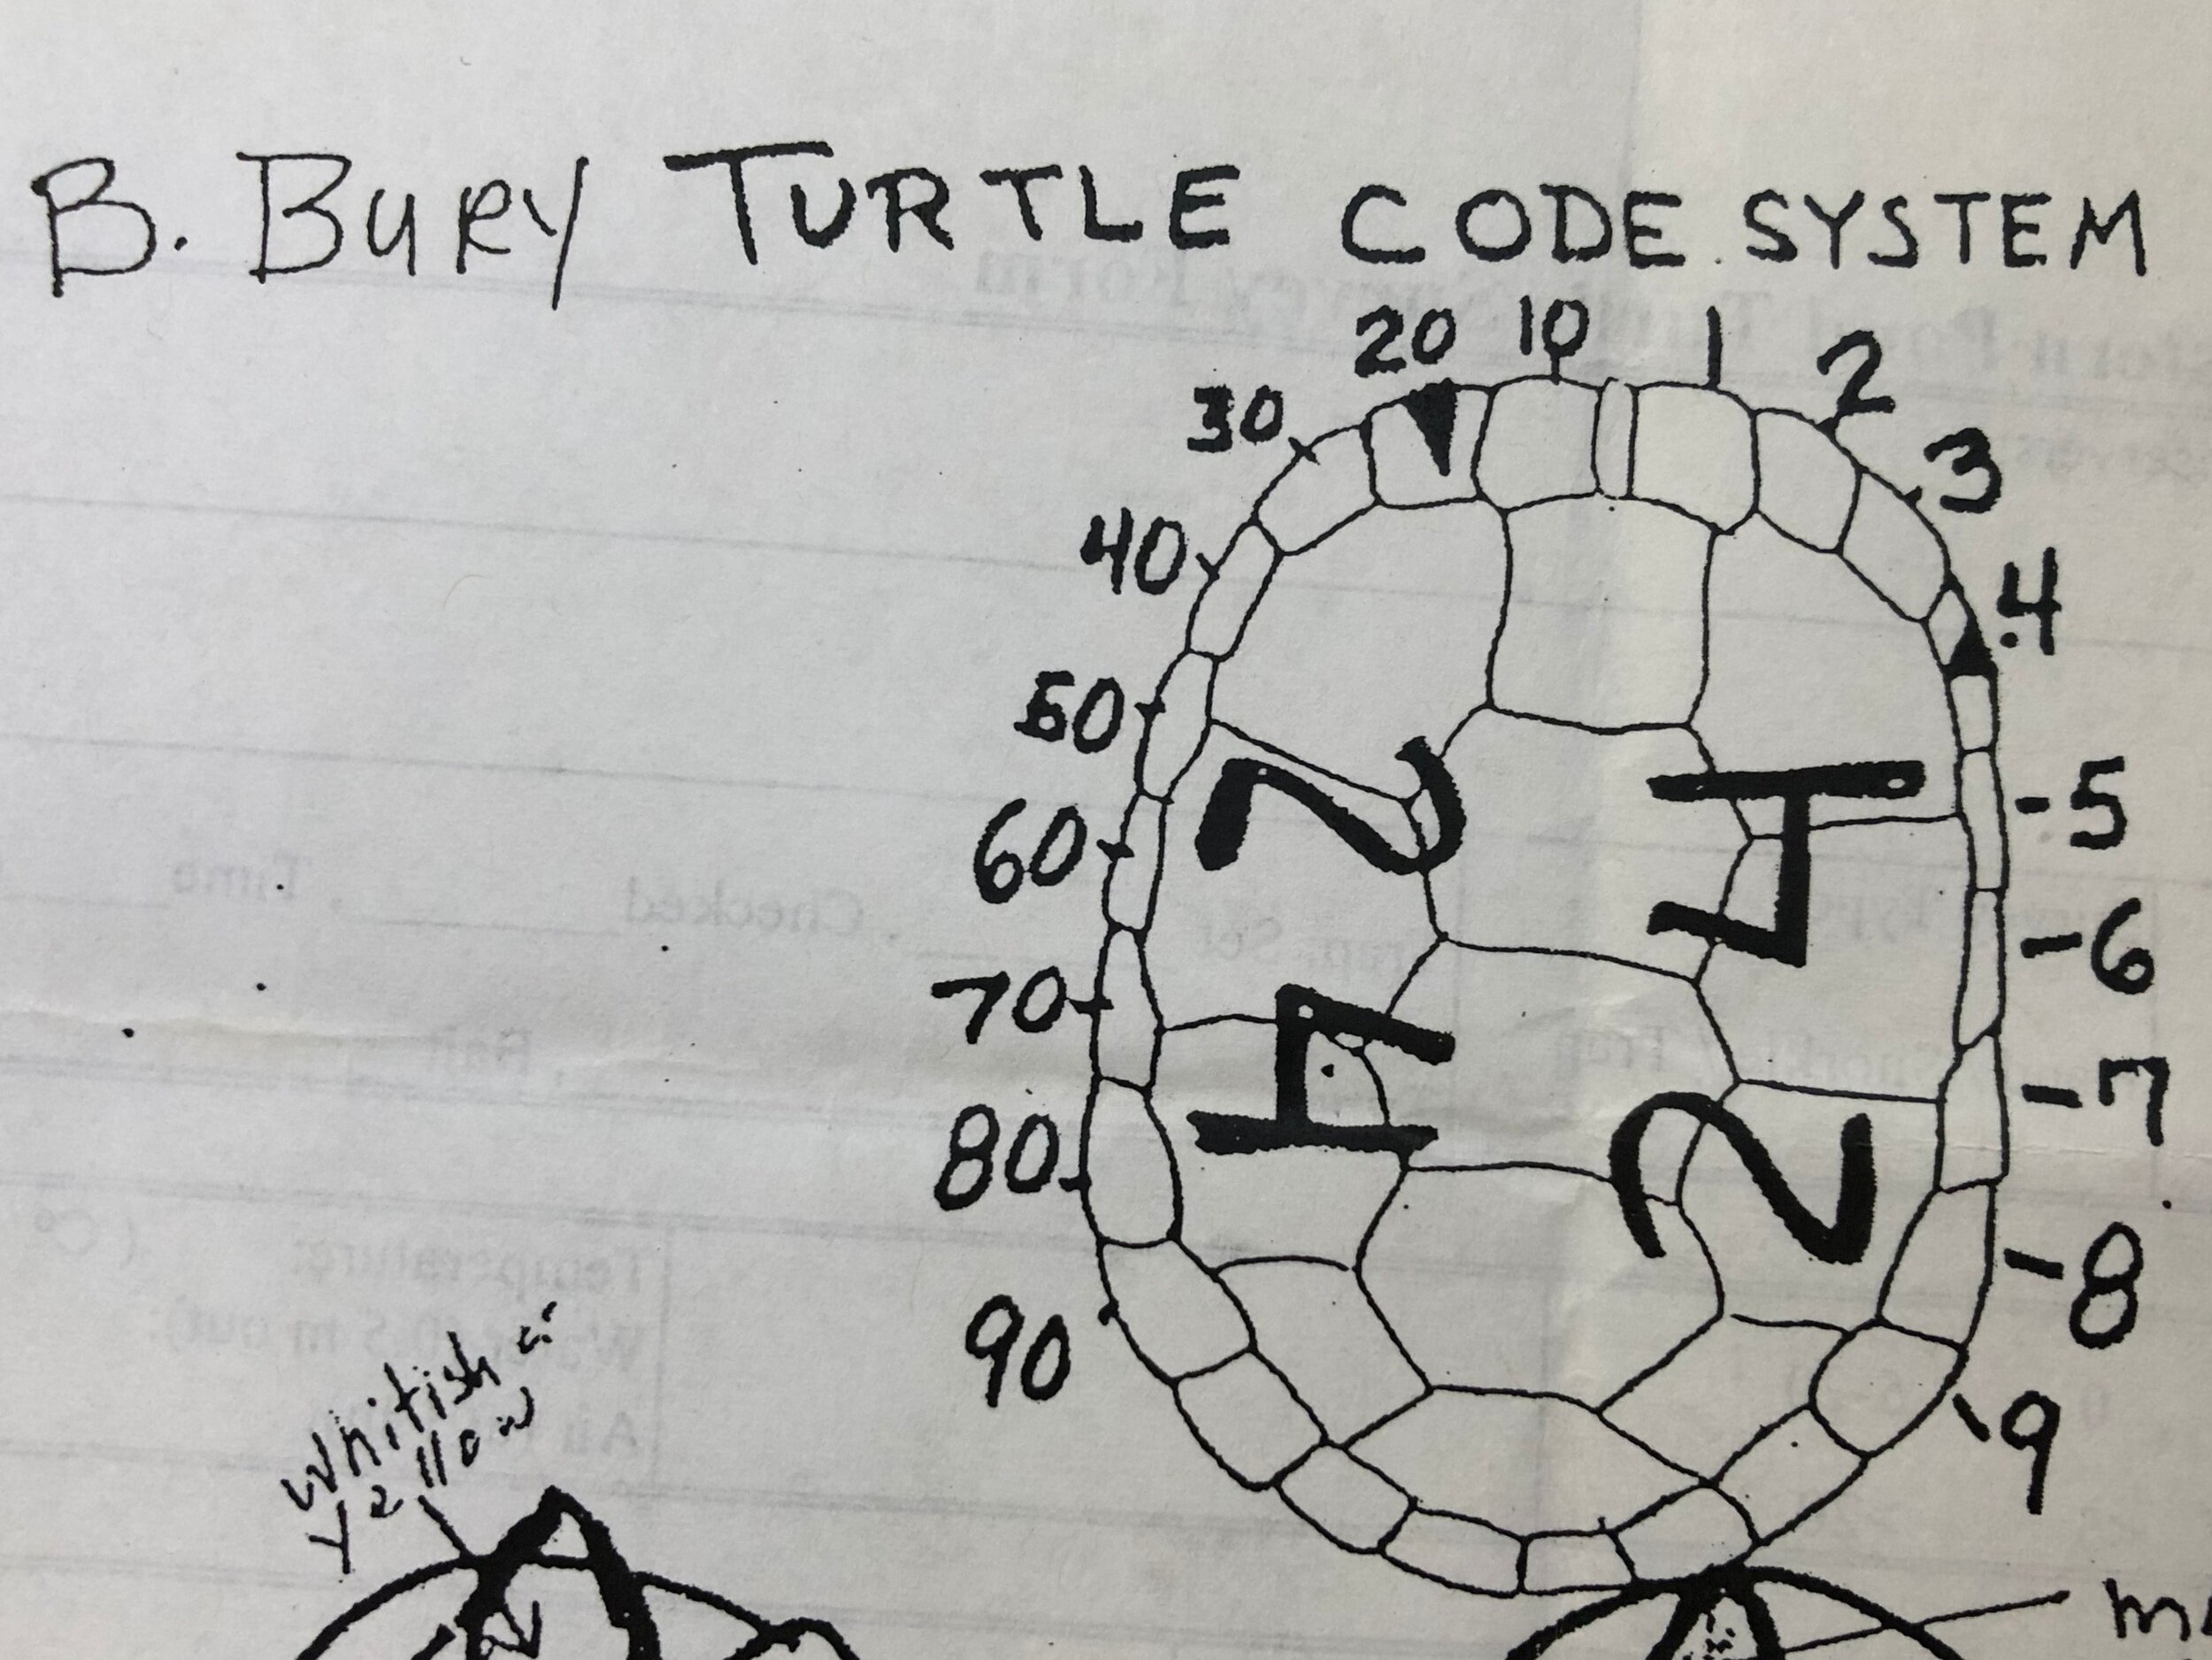  Each individual turtle is given a number and two of its marginal scutes are notched to display that code. This helps scientists track individuals over time.  